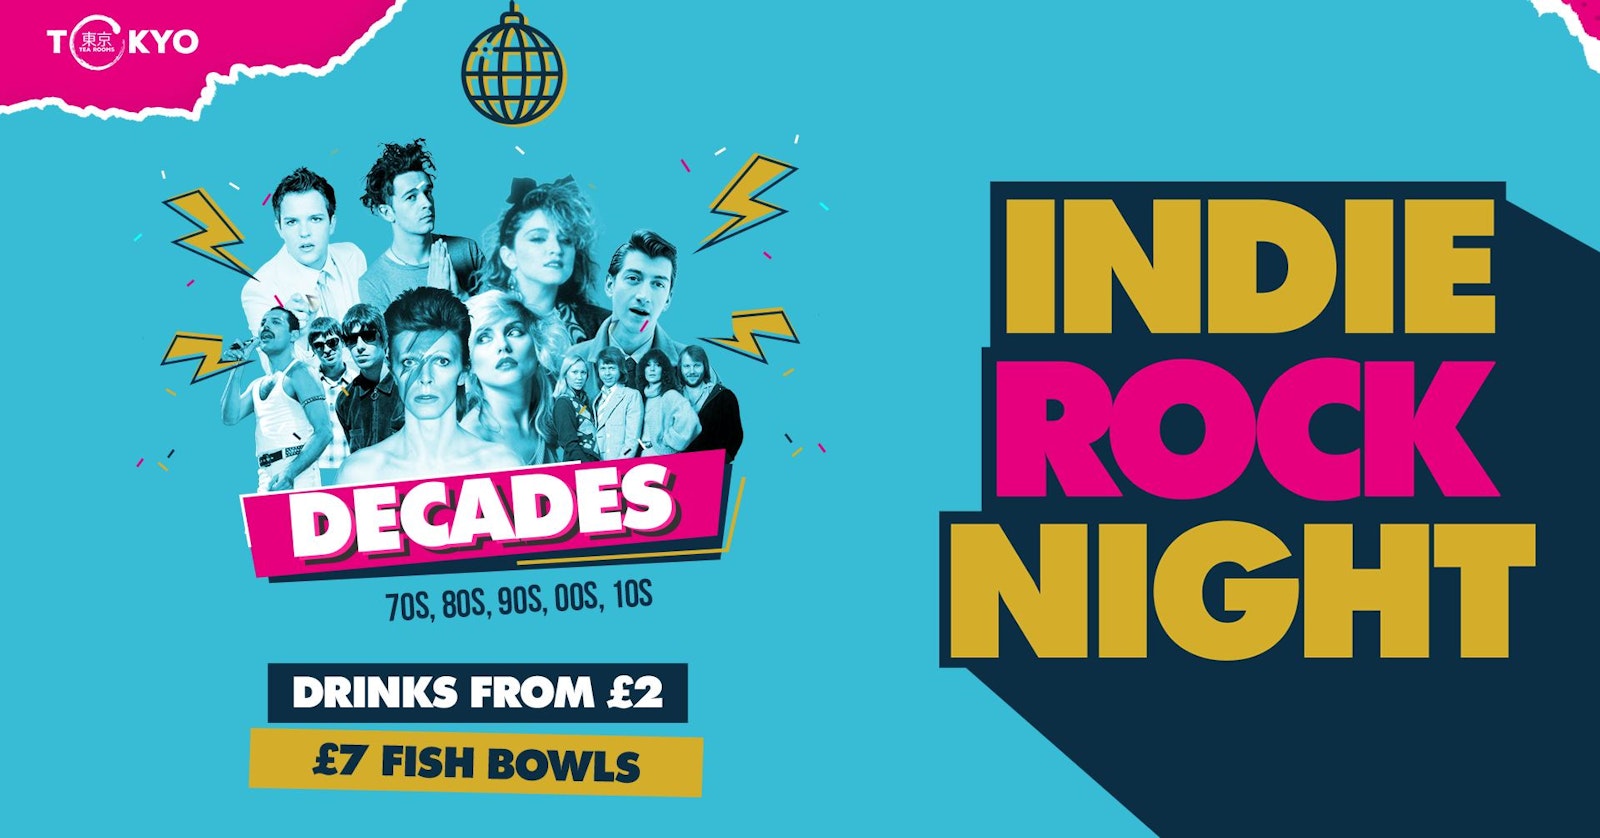 Indie Rock Night ∙ DECADES (60s, 70s, 80s, 90s, 00s, 10s) *ONLY 10 £2 TICKETS LEFT*